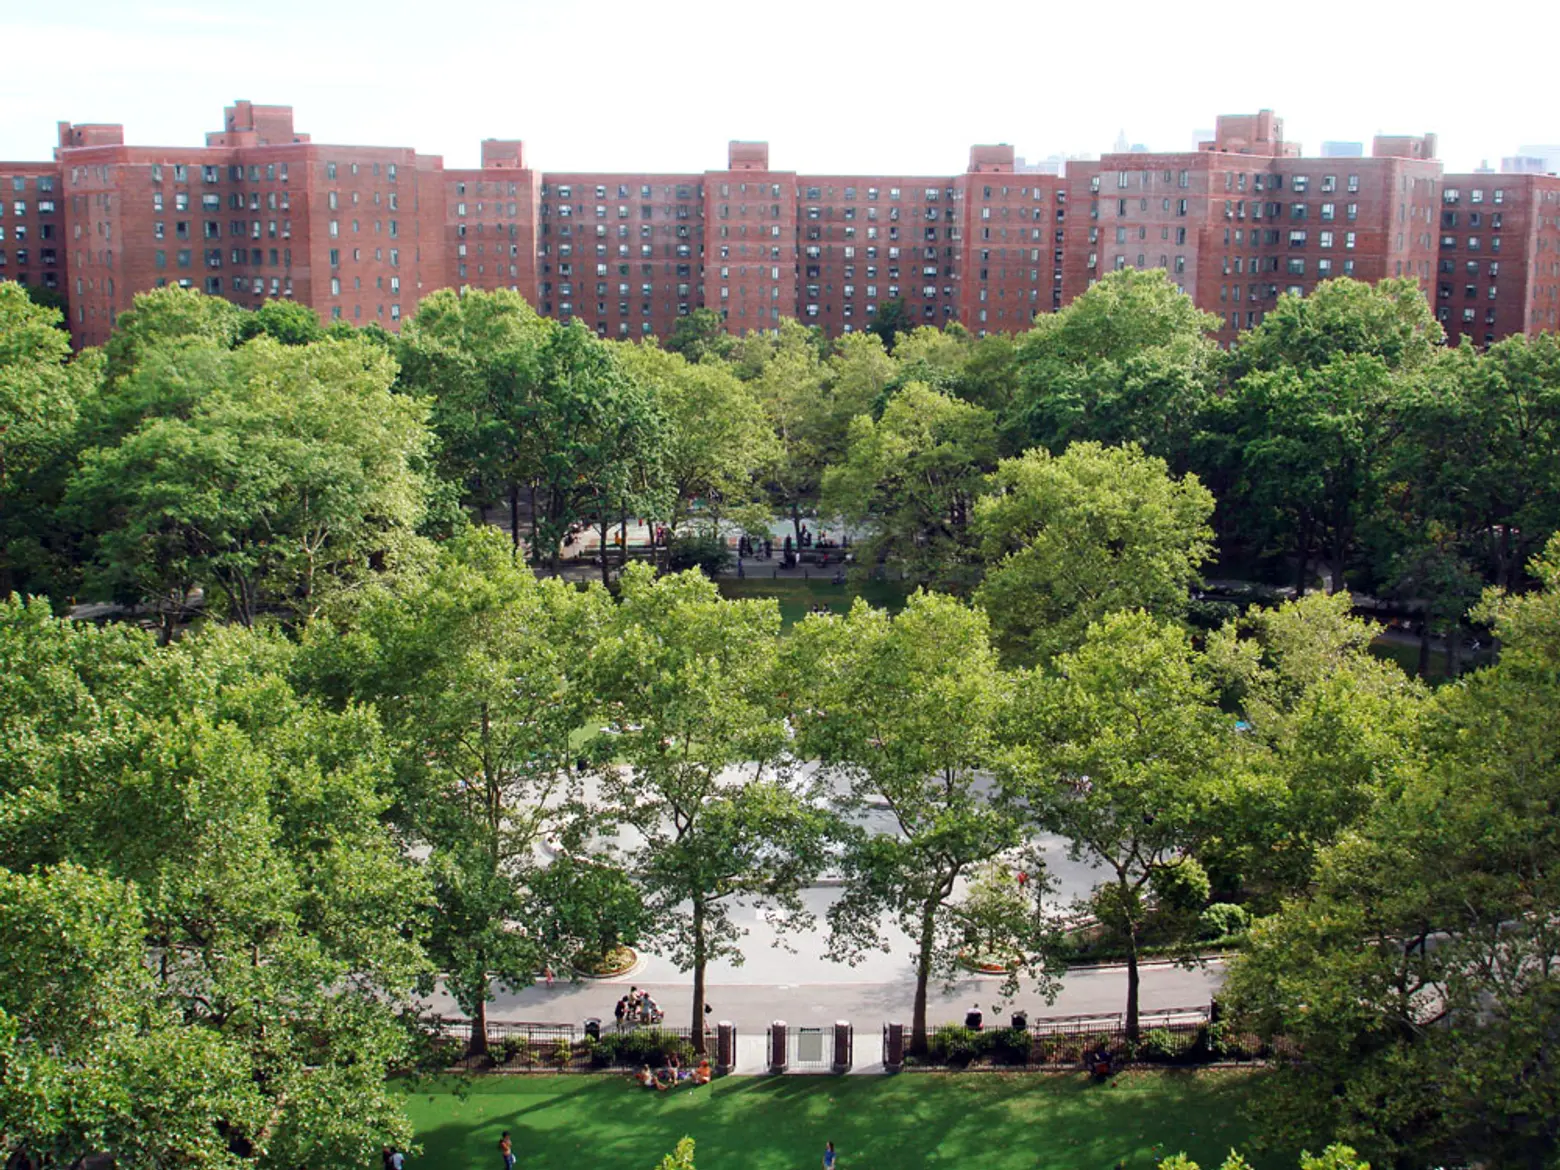 Apply for One of Stuyvesant Town’s Affordable Apartments, Starting at $1,200/Month